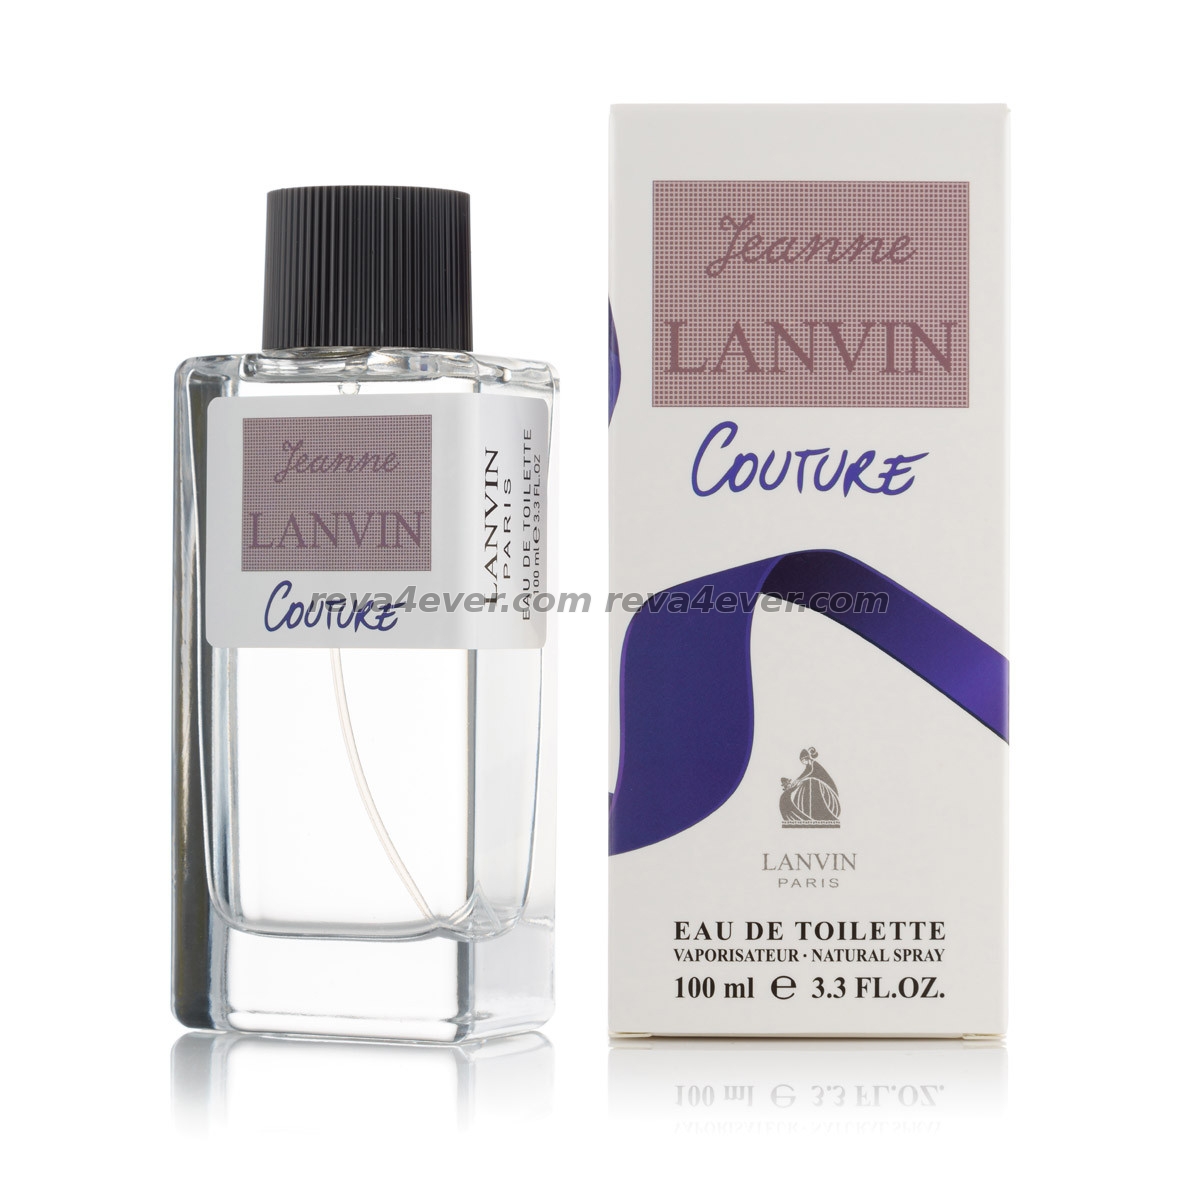 Lanvin Jeanne Couture edt 100ml Imperatrice style